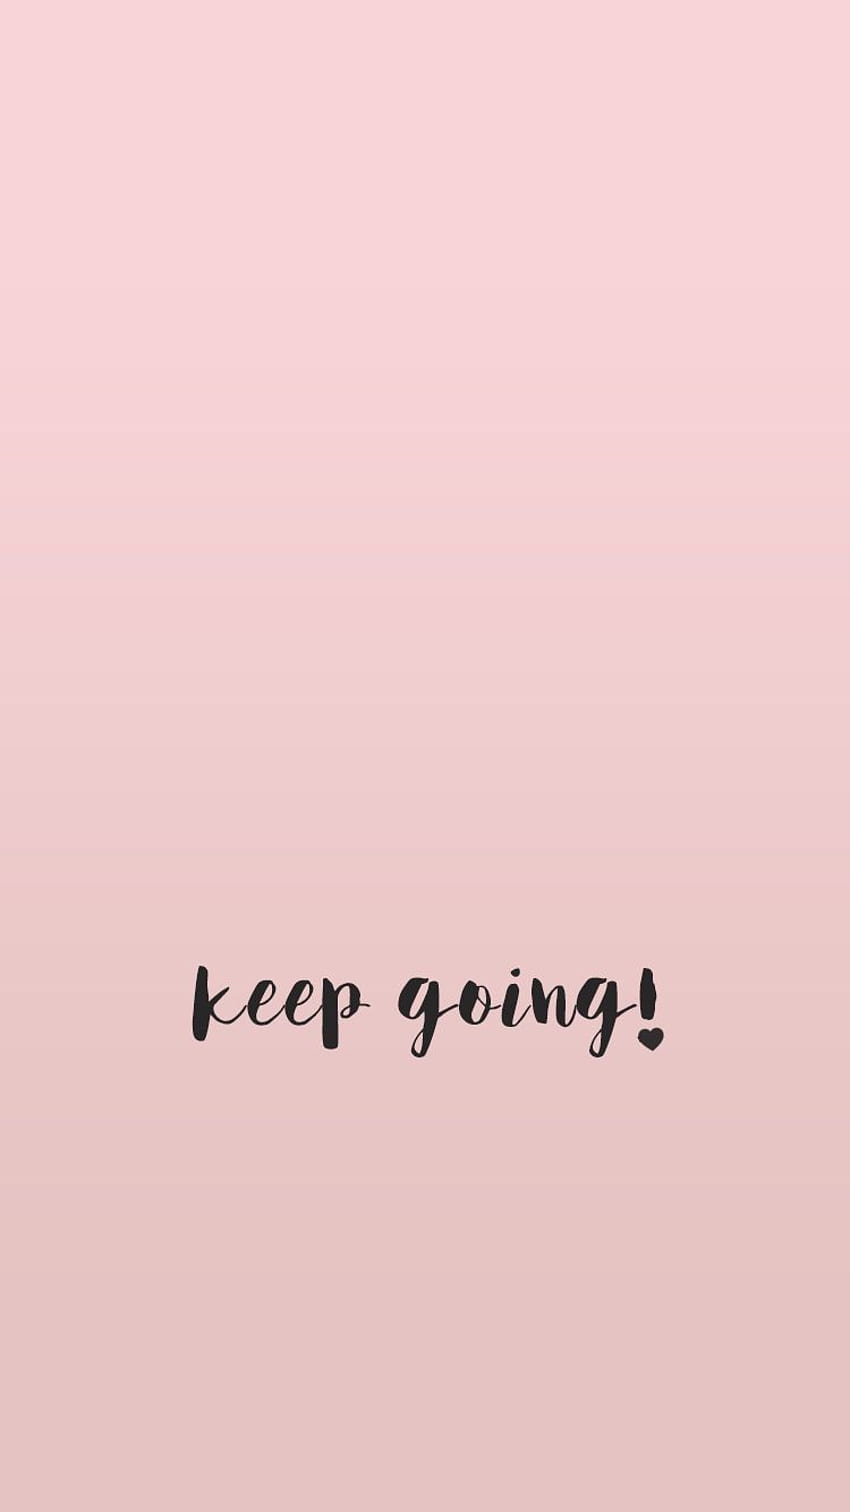 Motivational Wallpapers  Pink wallpaper quotes Iphone wallpaper quotes  inspirational Pink quotes